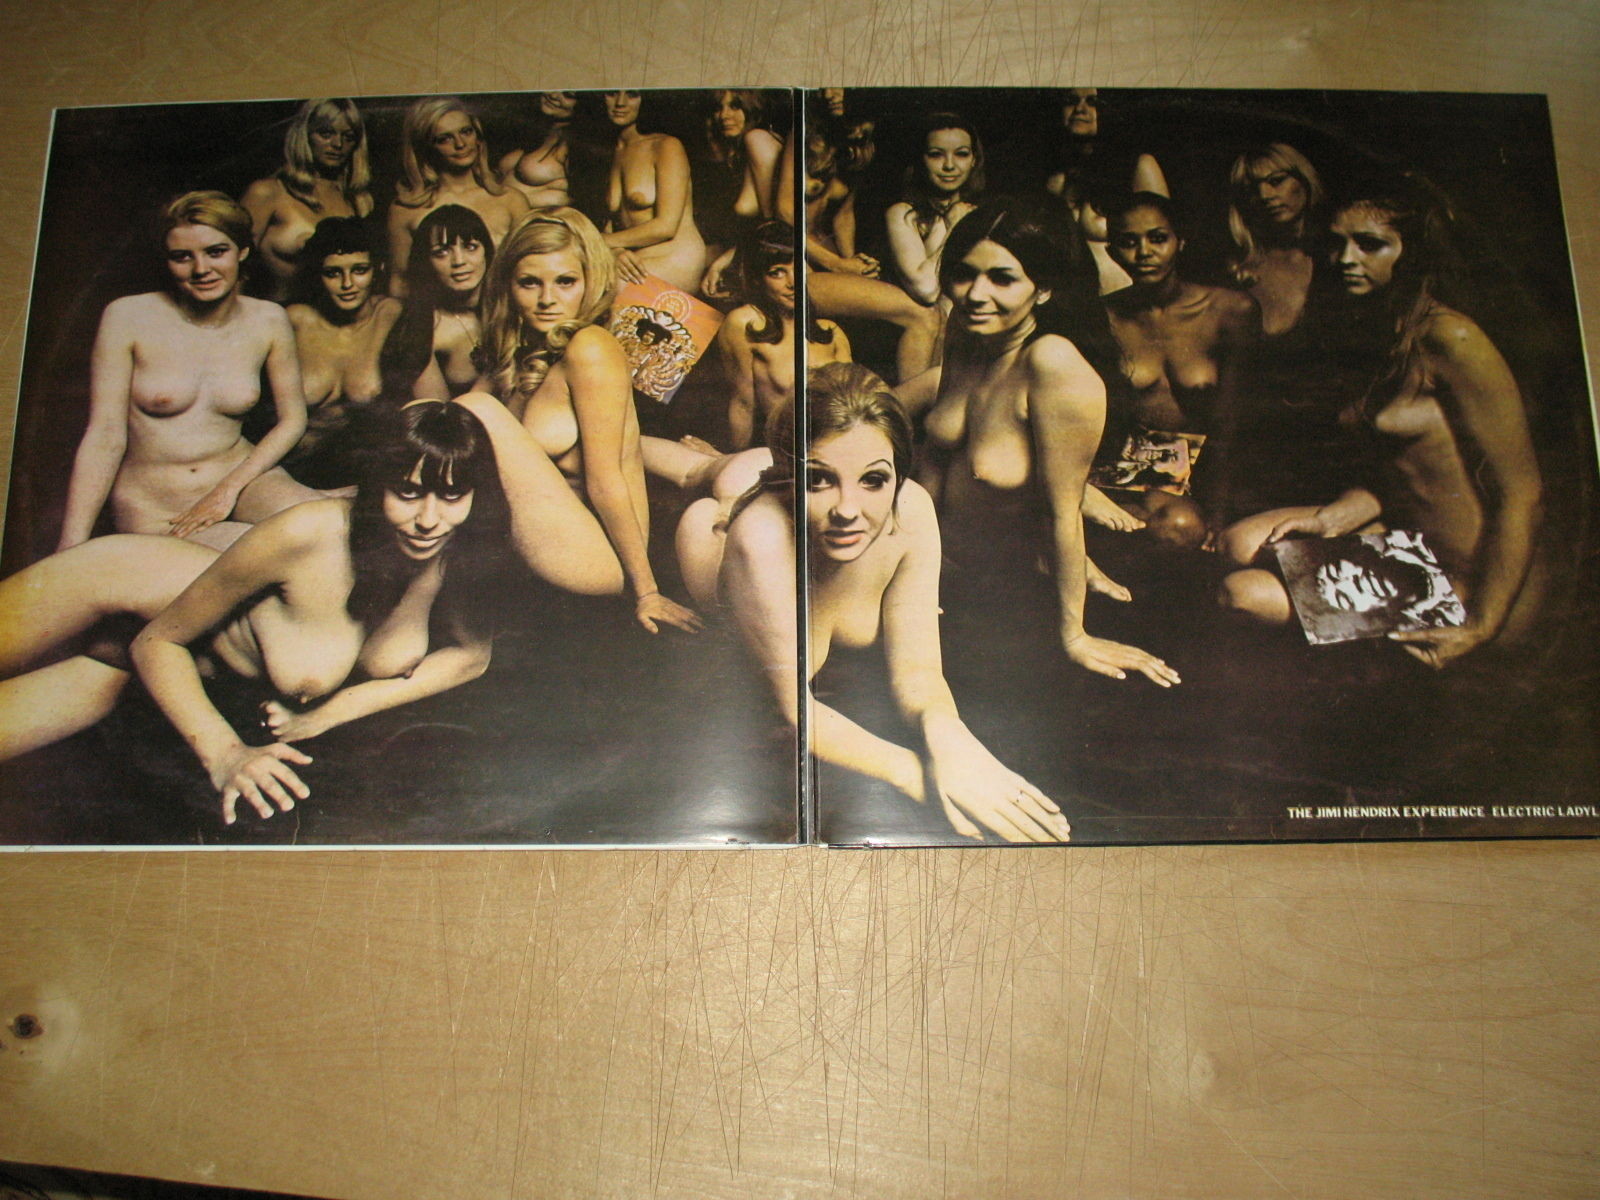 JIMY HENDRIX EXPERIENCE «Electric Ladyland»